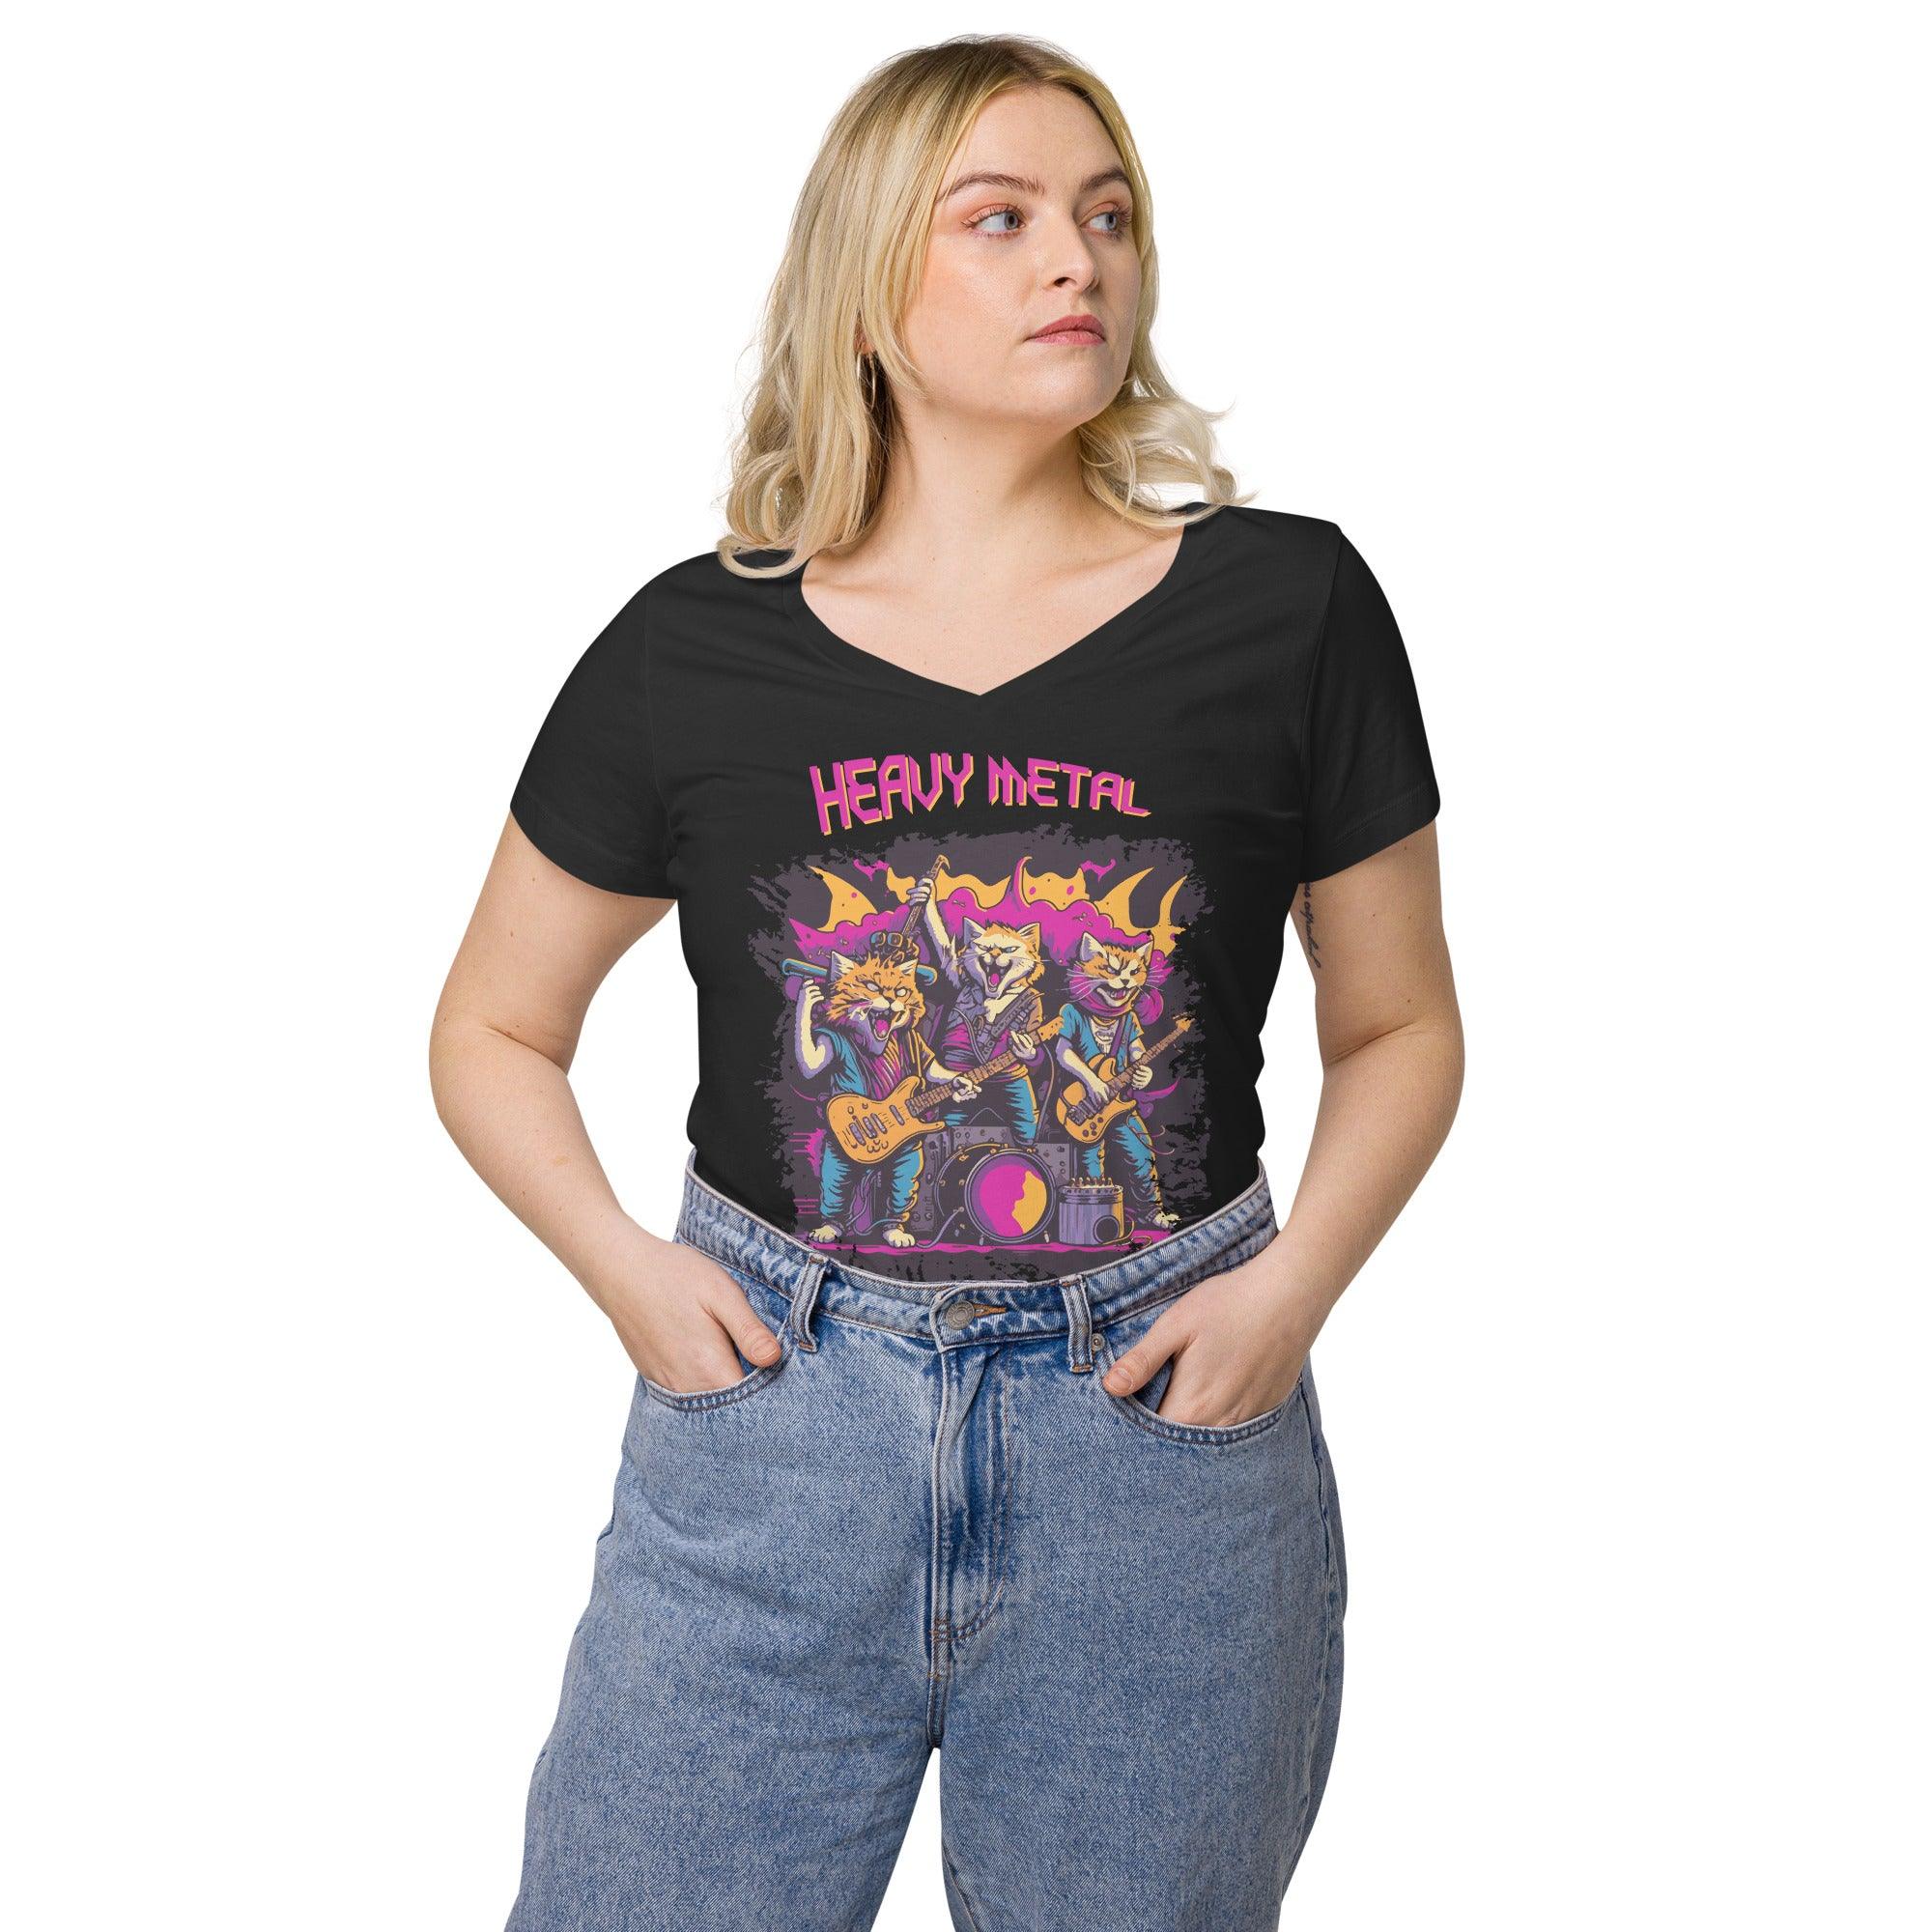 Heavy metal women’s fitted v-neck t-shirt - Beyond T-shirts